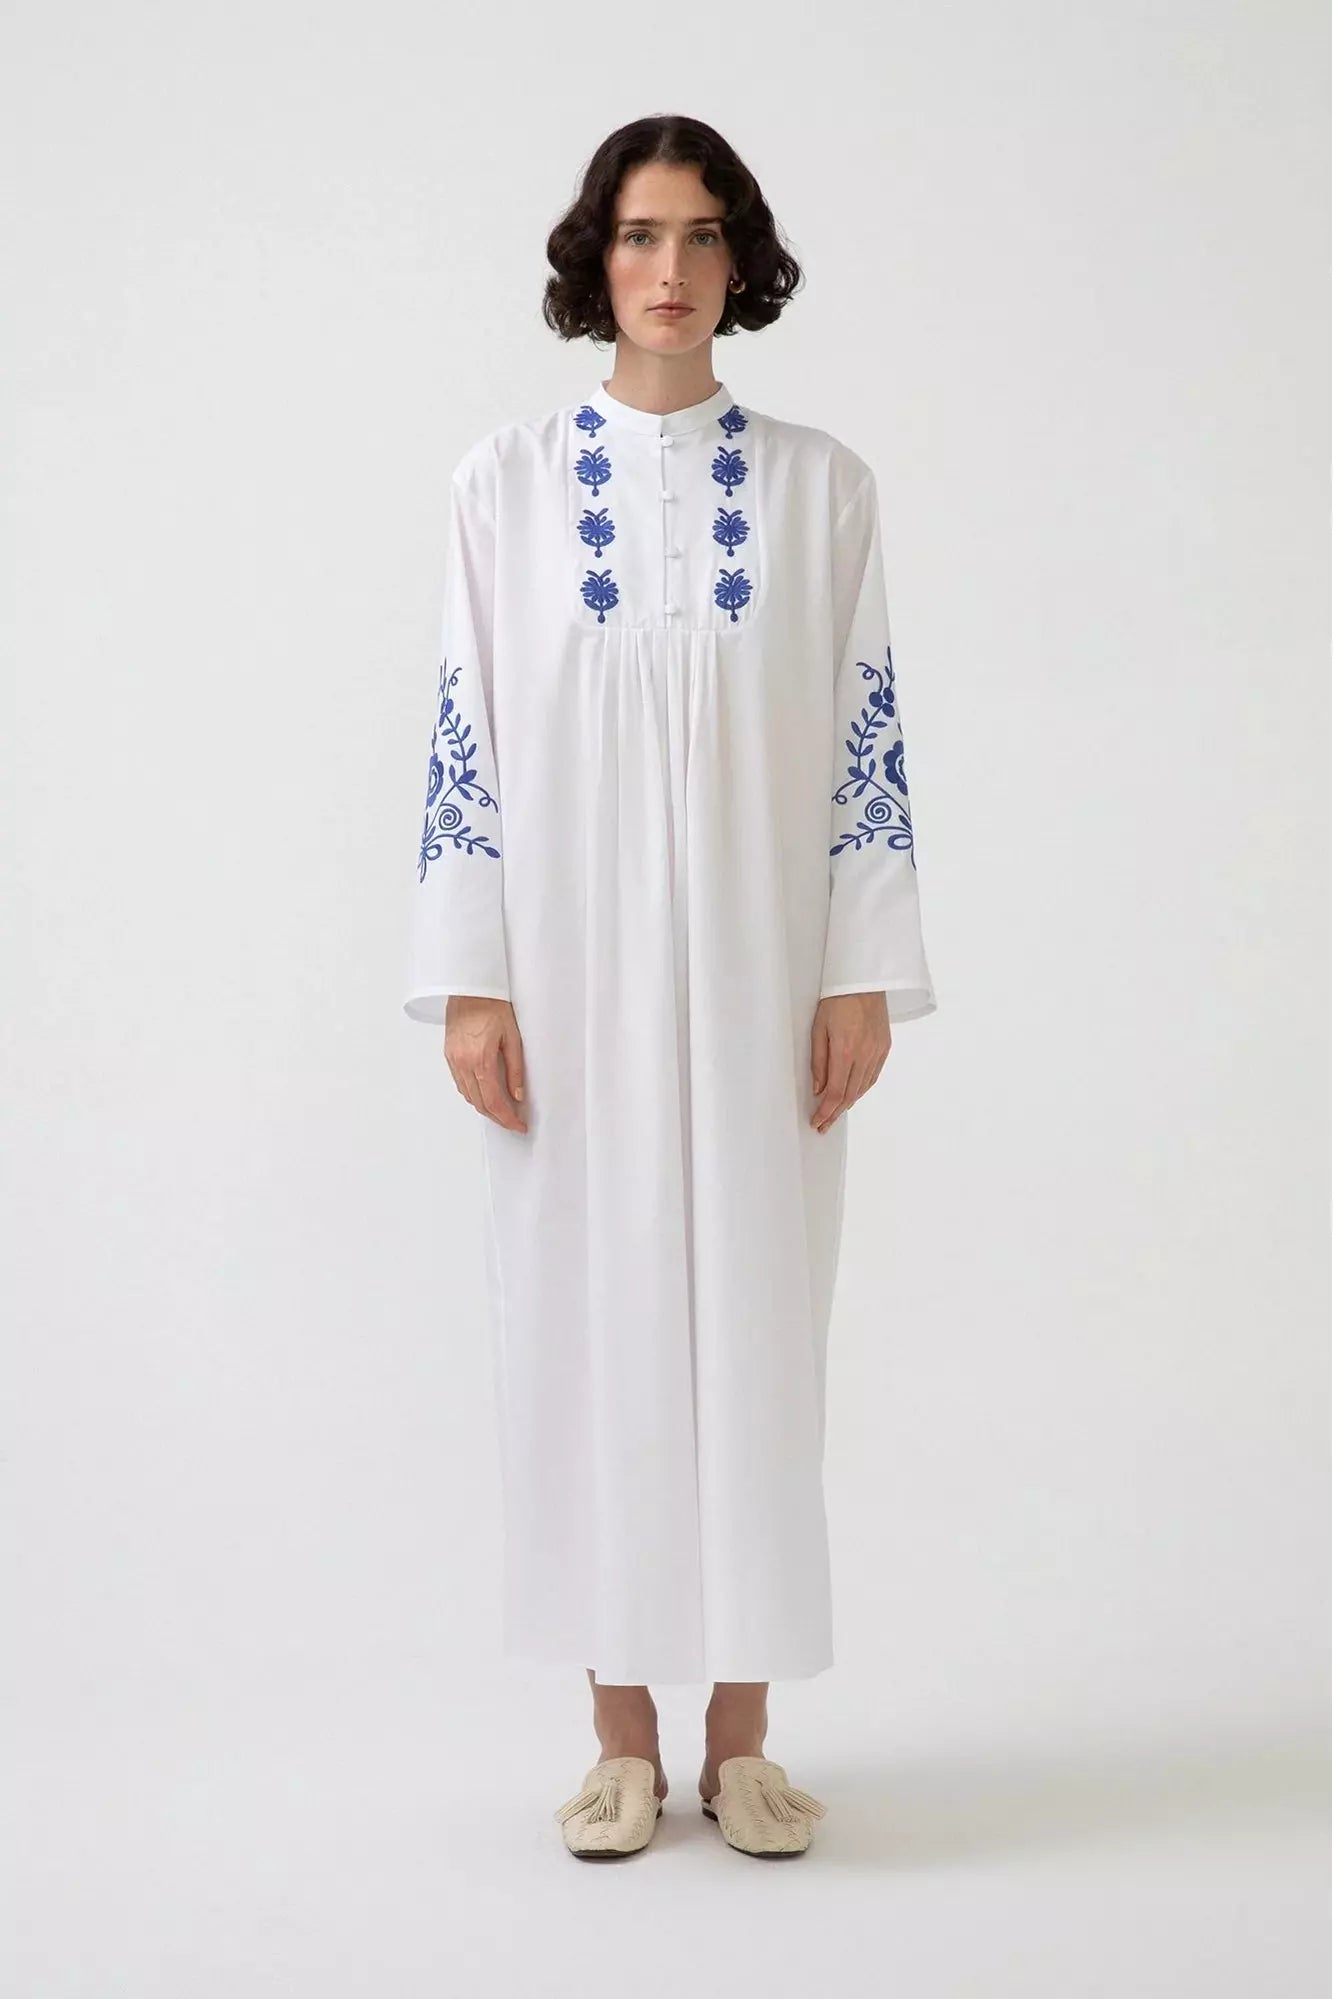 Zara White Embroidered Dress with Long Sleeve Dress By Baano   